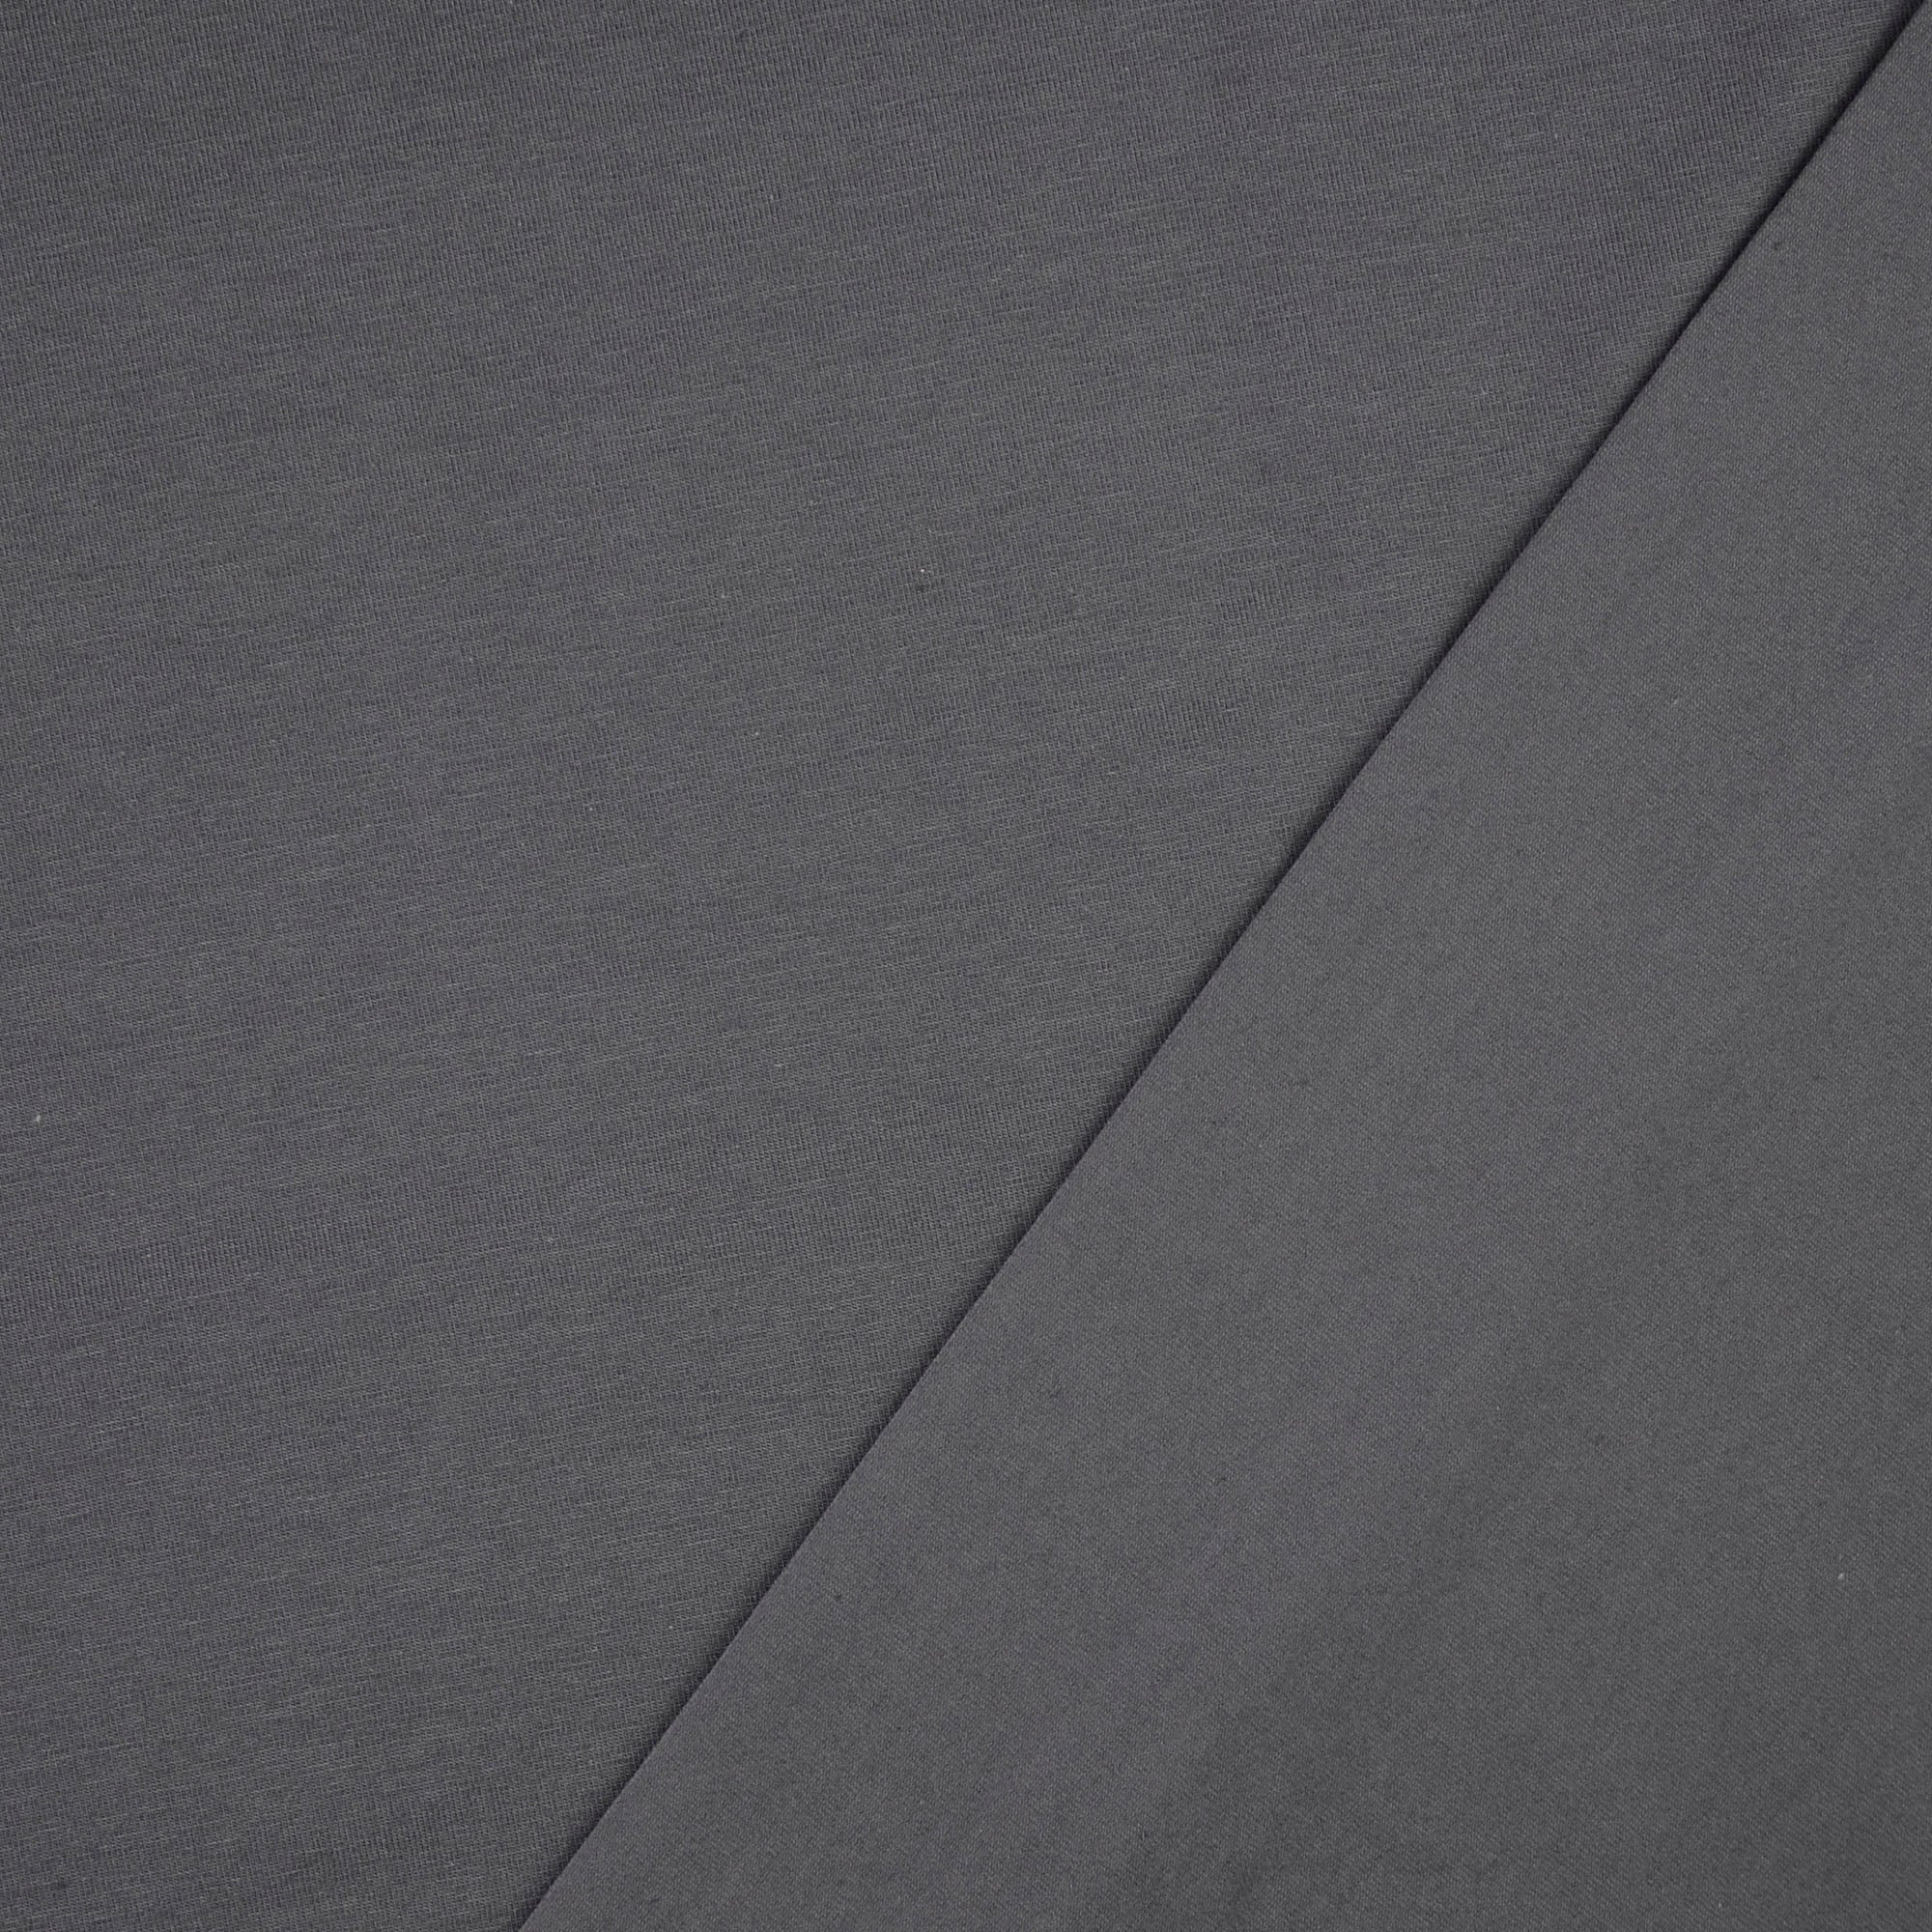 Essential Chic Charcoal Cotton Jersey Fabric